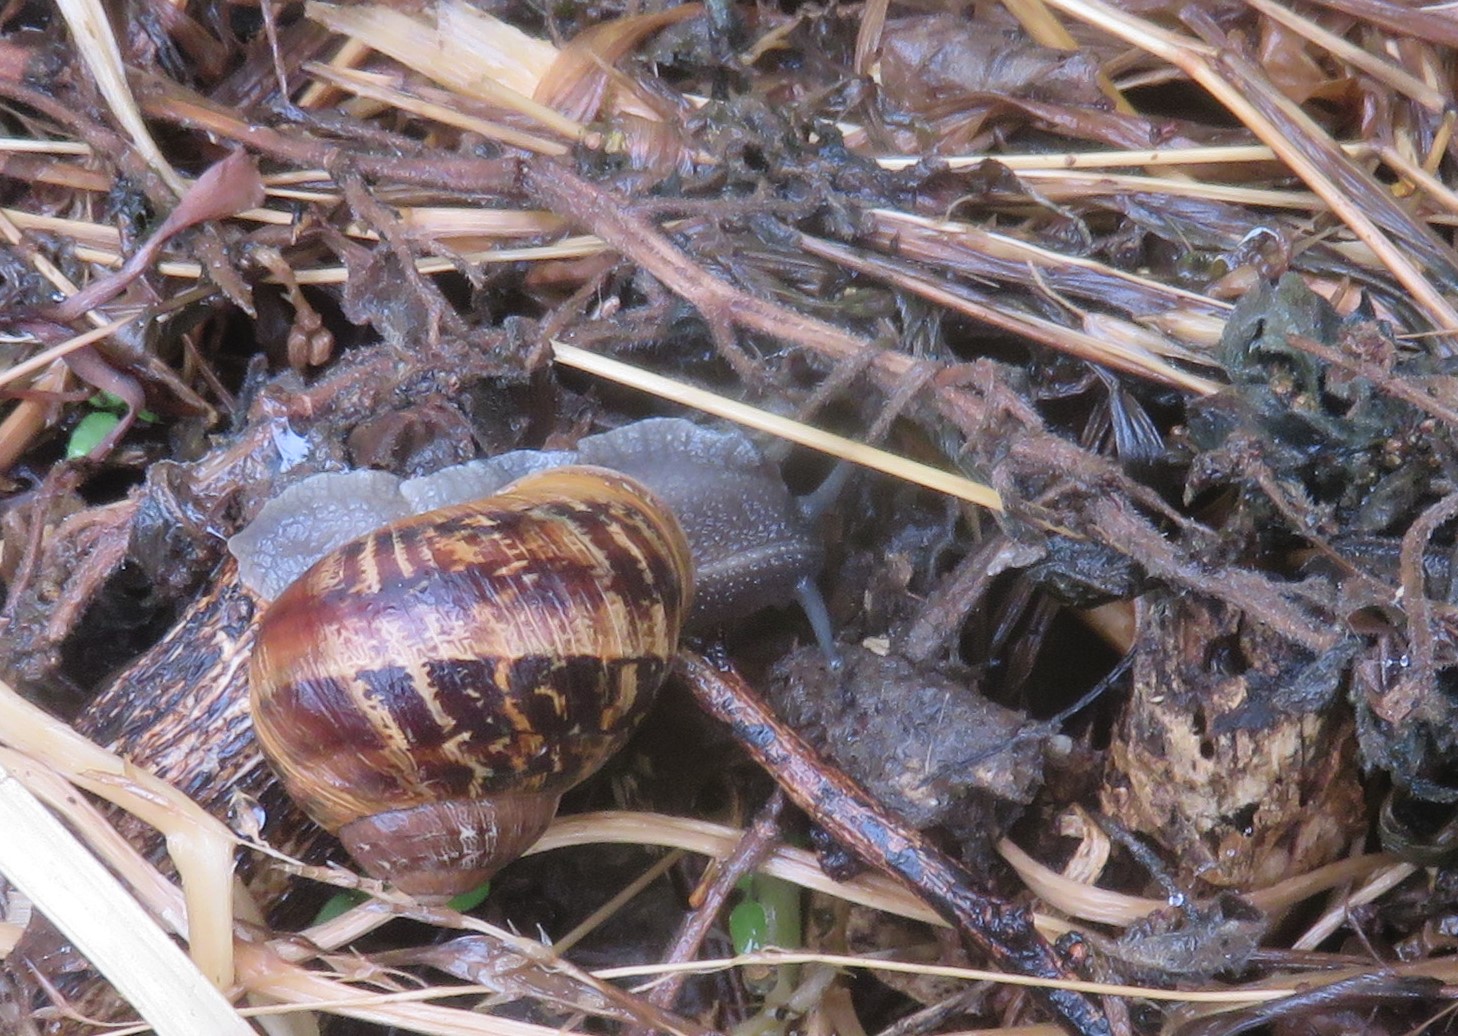 This snail was found eating decomposed black sludge